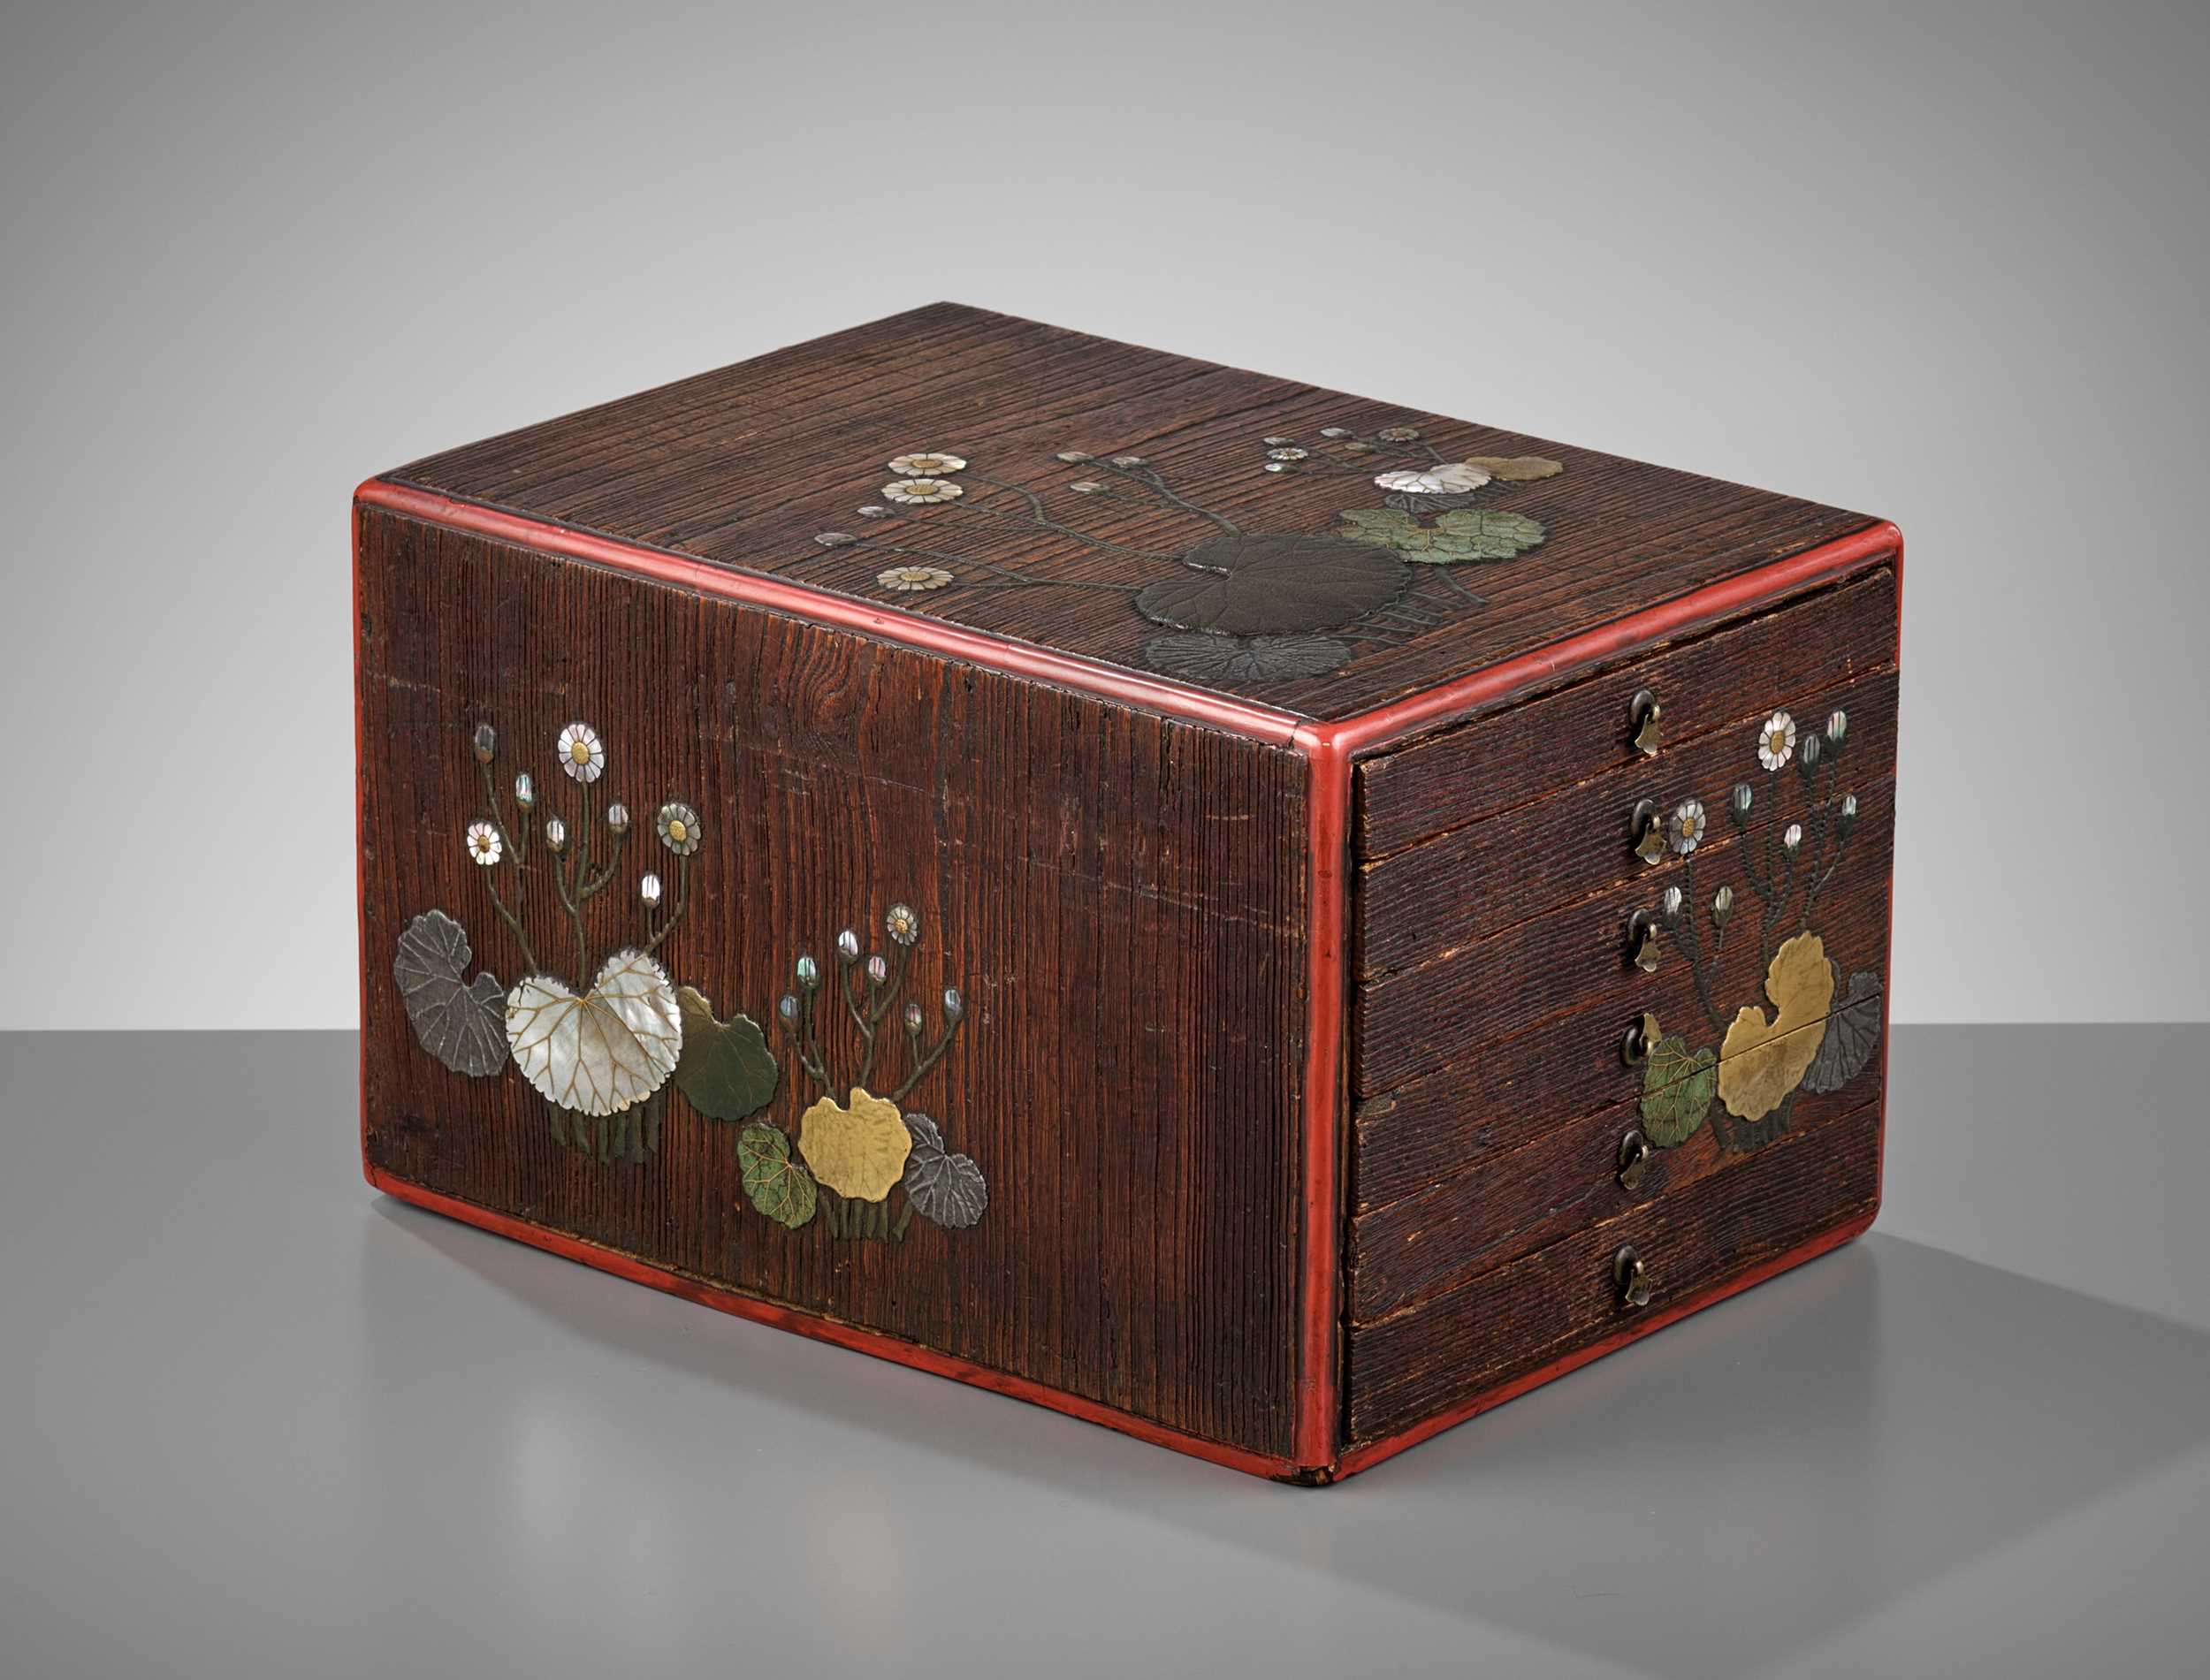 Lot 95 - A CERAMIC AND MOTHER-OF-PEARL INLAID LACQUERED KIRI (PAULOWNIA) WOOD CABINET IN THE STYLE OF RITSUO